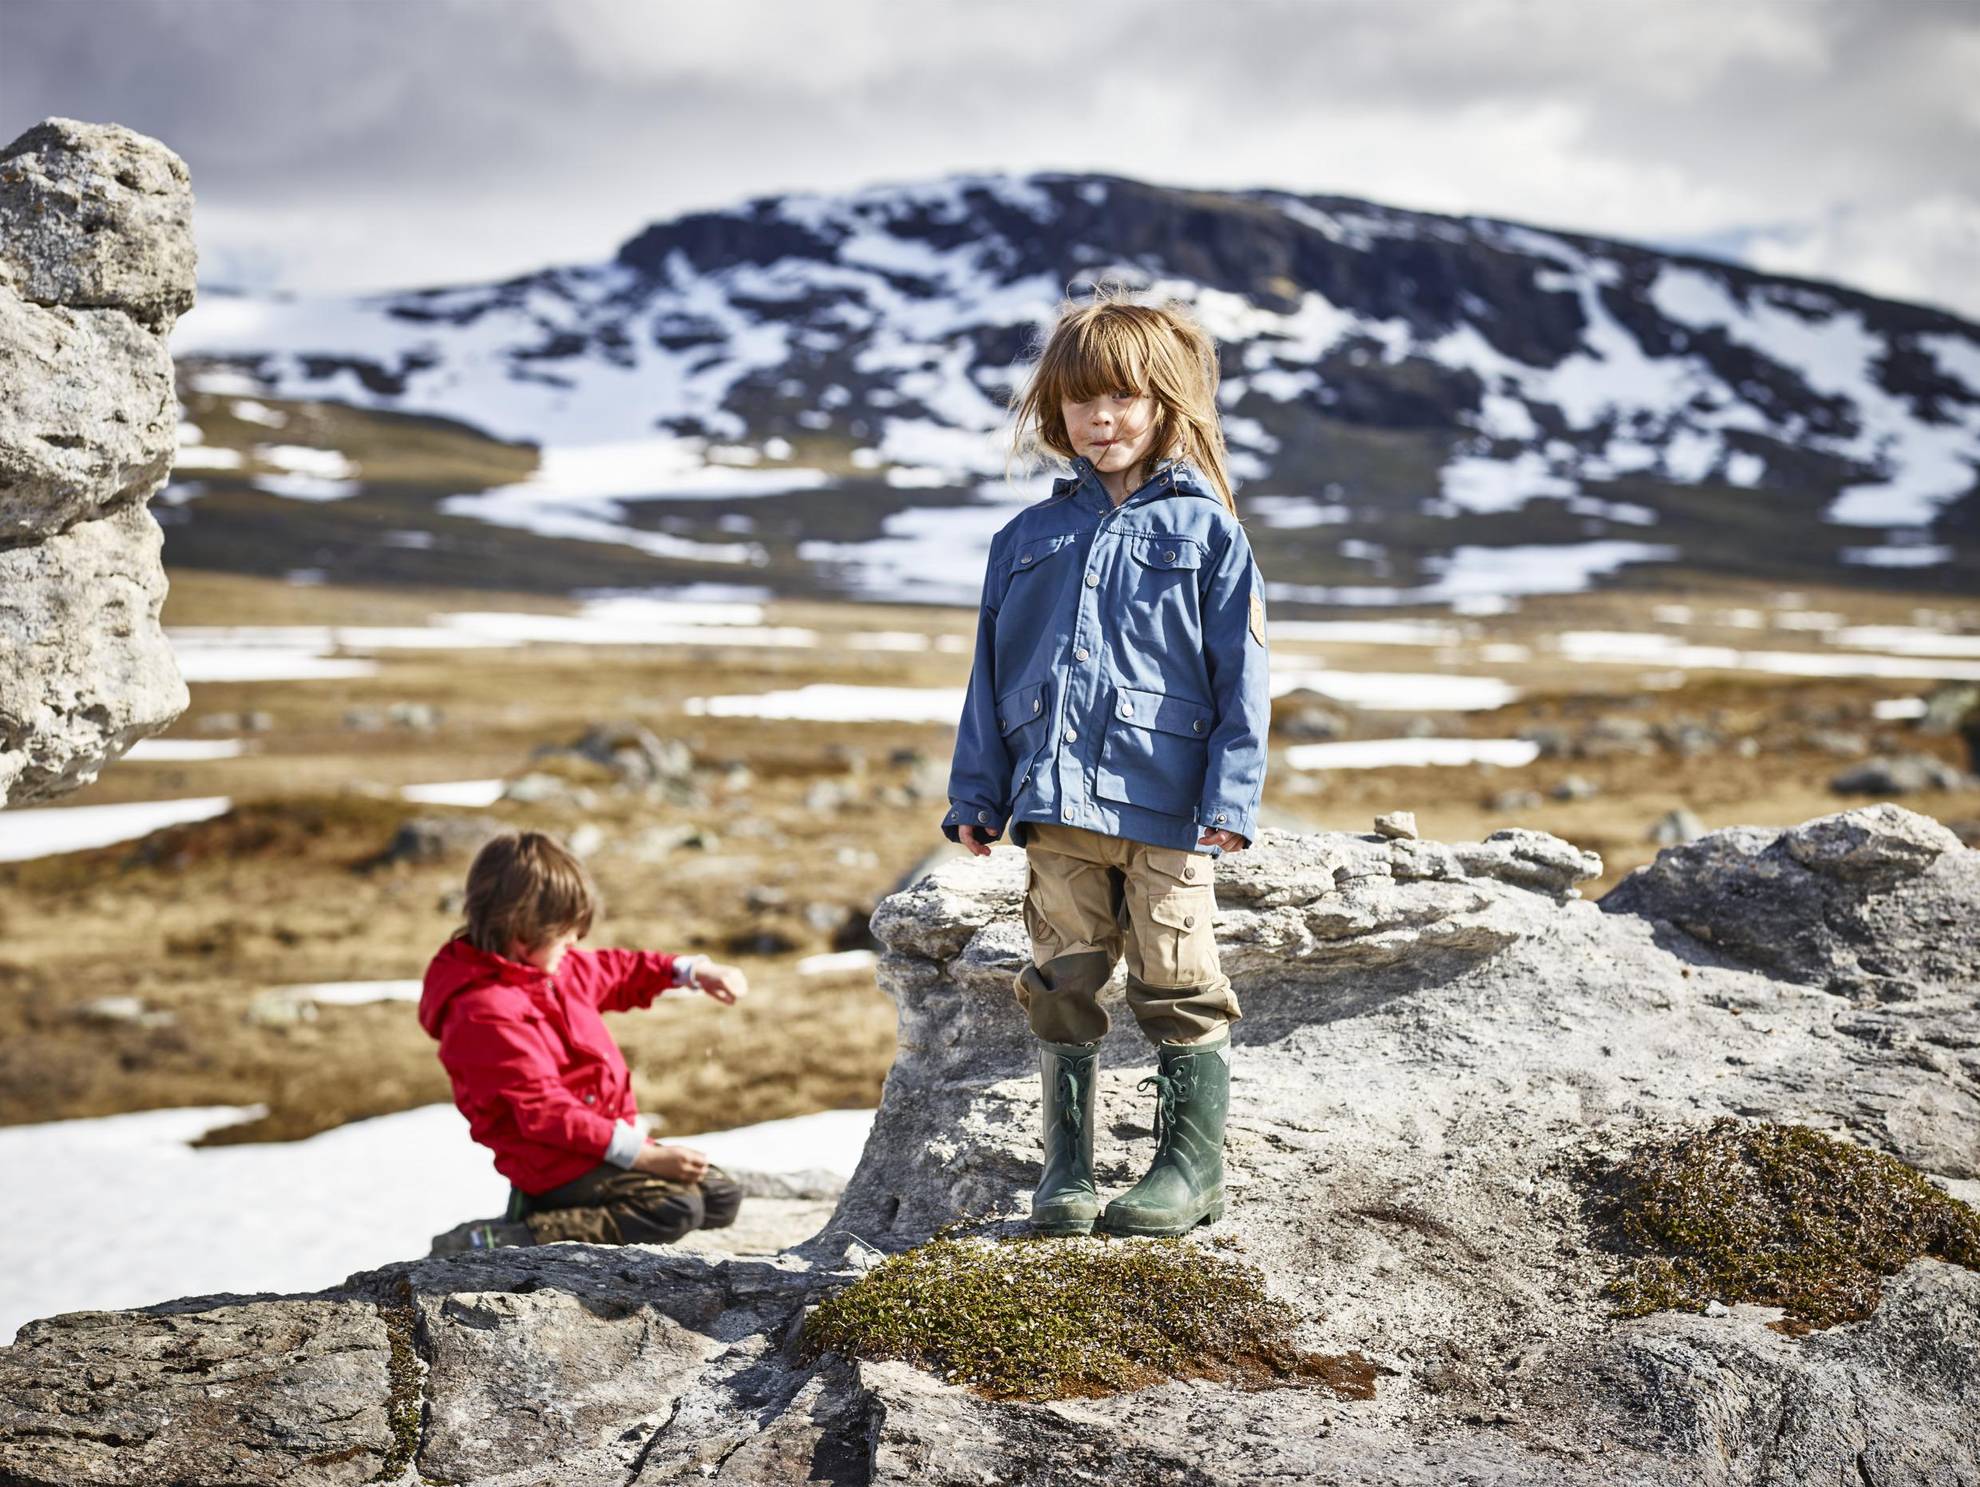 Two kids on a hike in Padjelanta in northern Sweden, surrounded by patches of snow and mountain peaks.